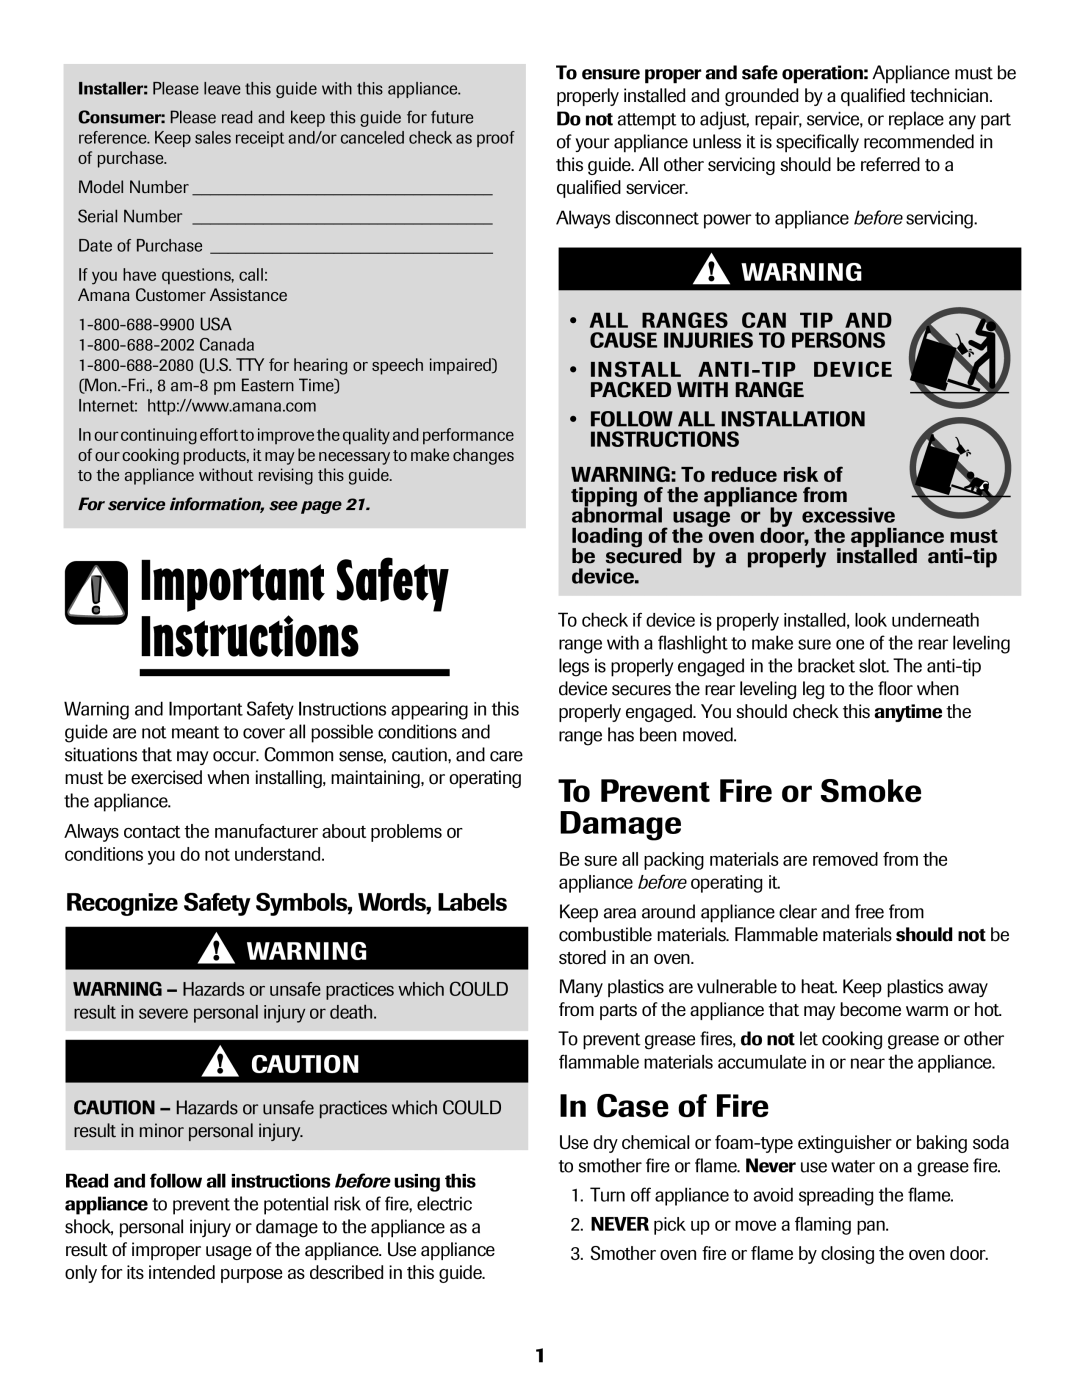 Amana Electric Range - Coil manual Instructions, Important Safety, To Prevent Fire or Smoke Damage, In Case of Fire 